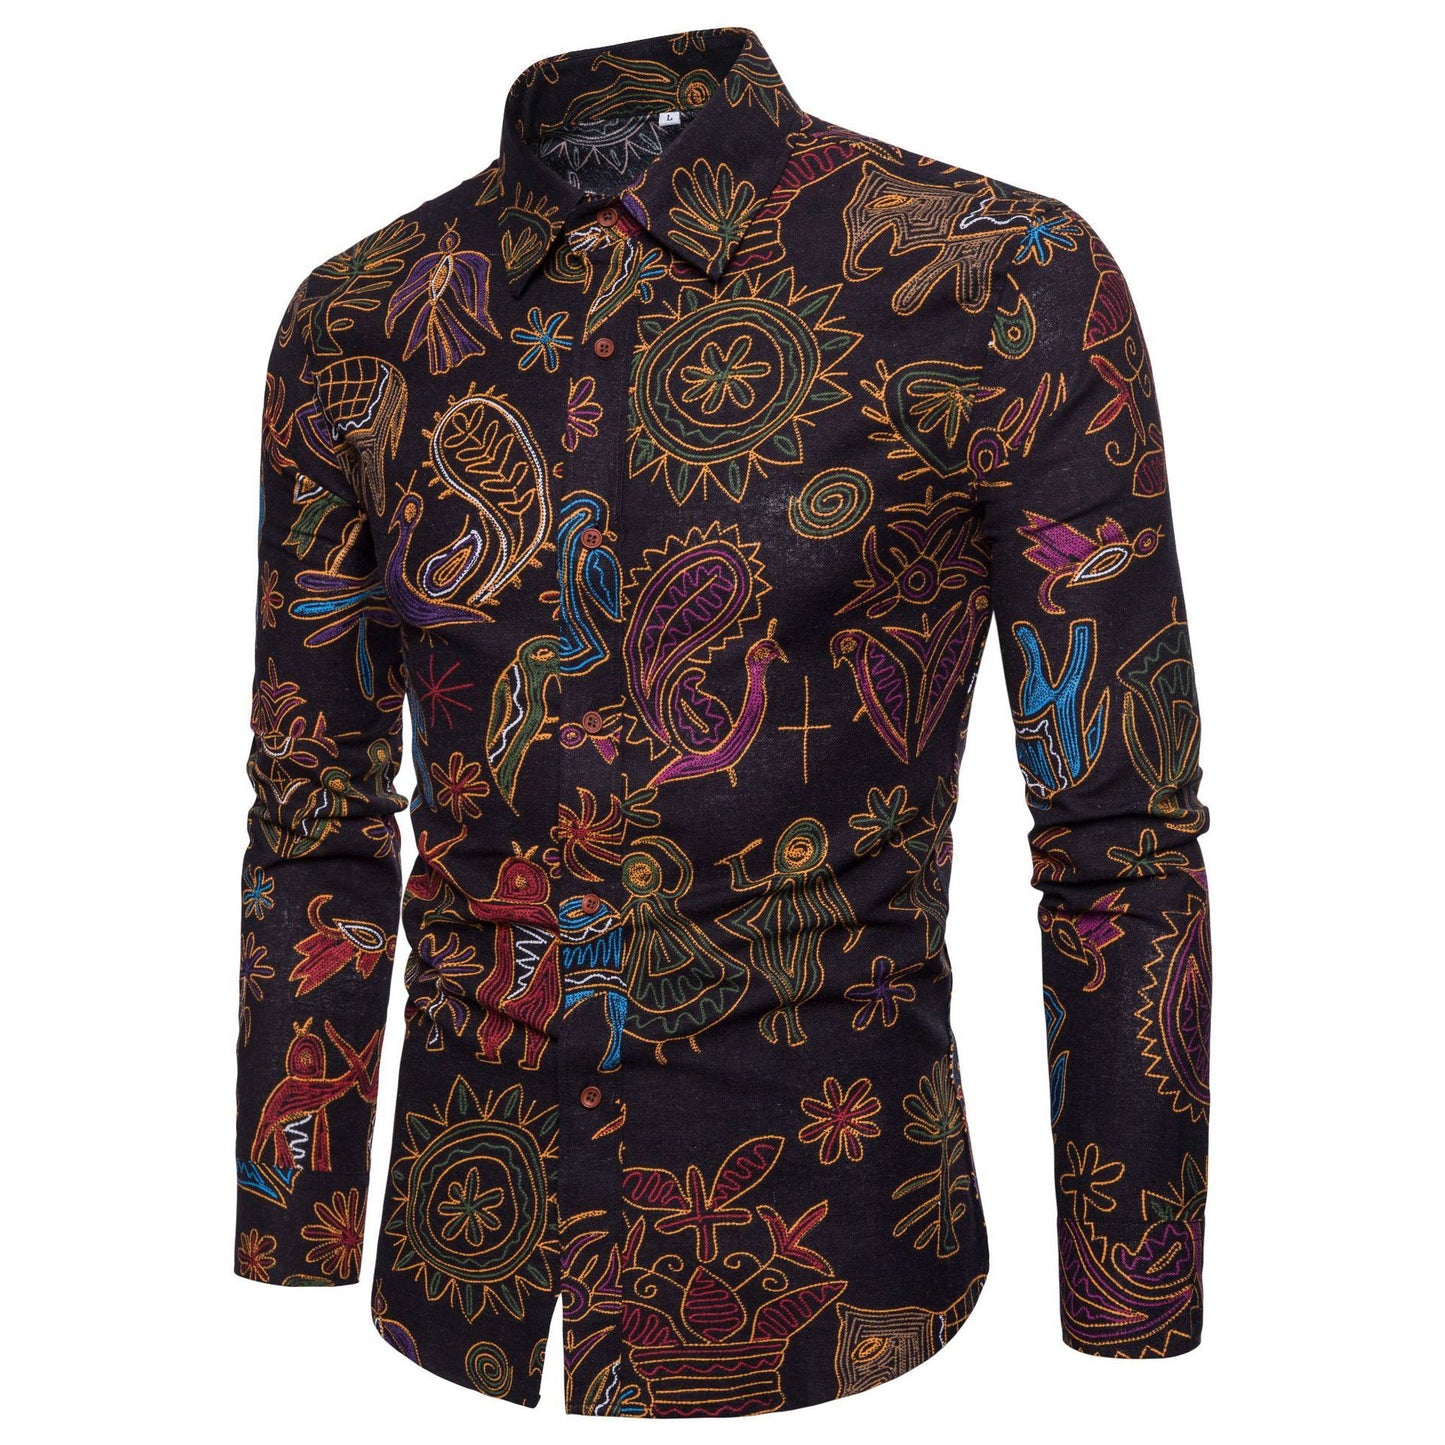 Men's Long Sleeve Hawaiian: Stand Out in Style. Choose from a variety of eye-catching tropical prints.